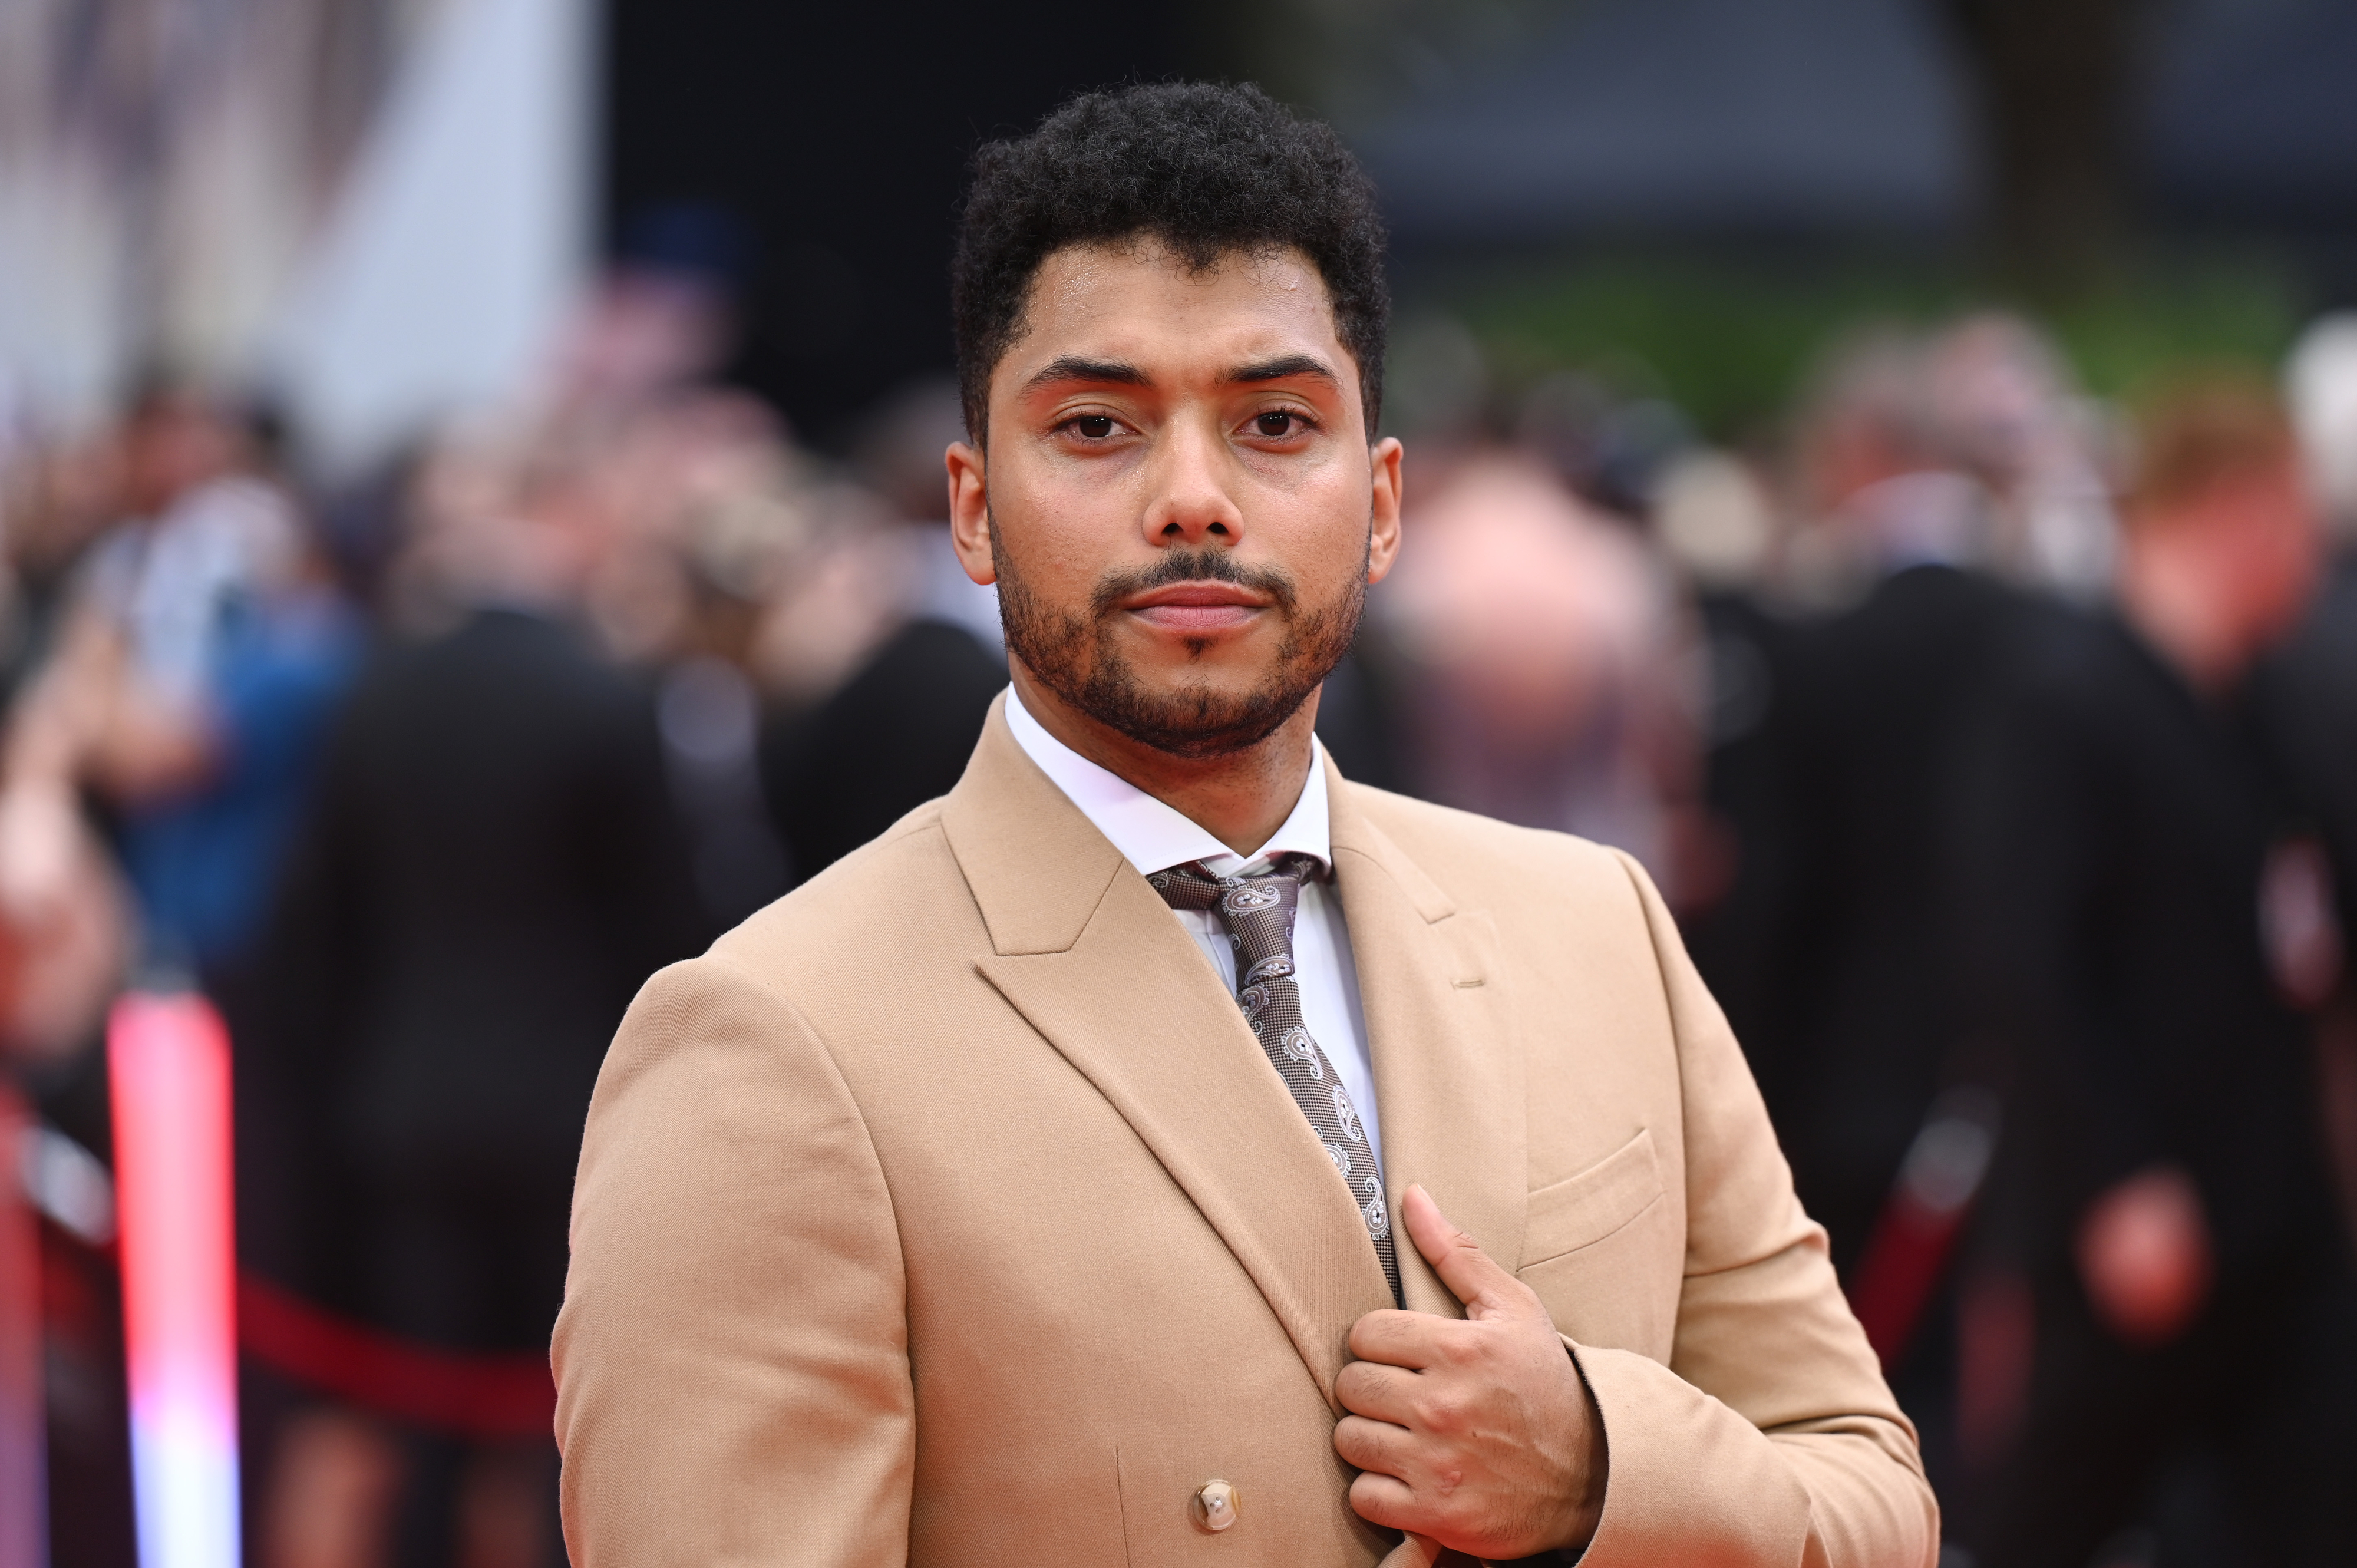 Chance Perdomo in a tailored suit and tie stands on the red carpet with his hand on his lapel